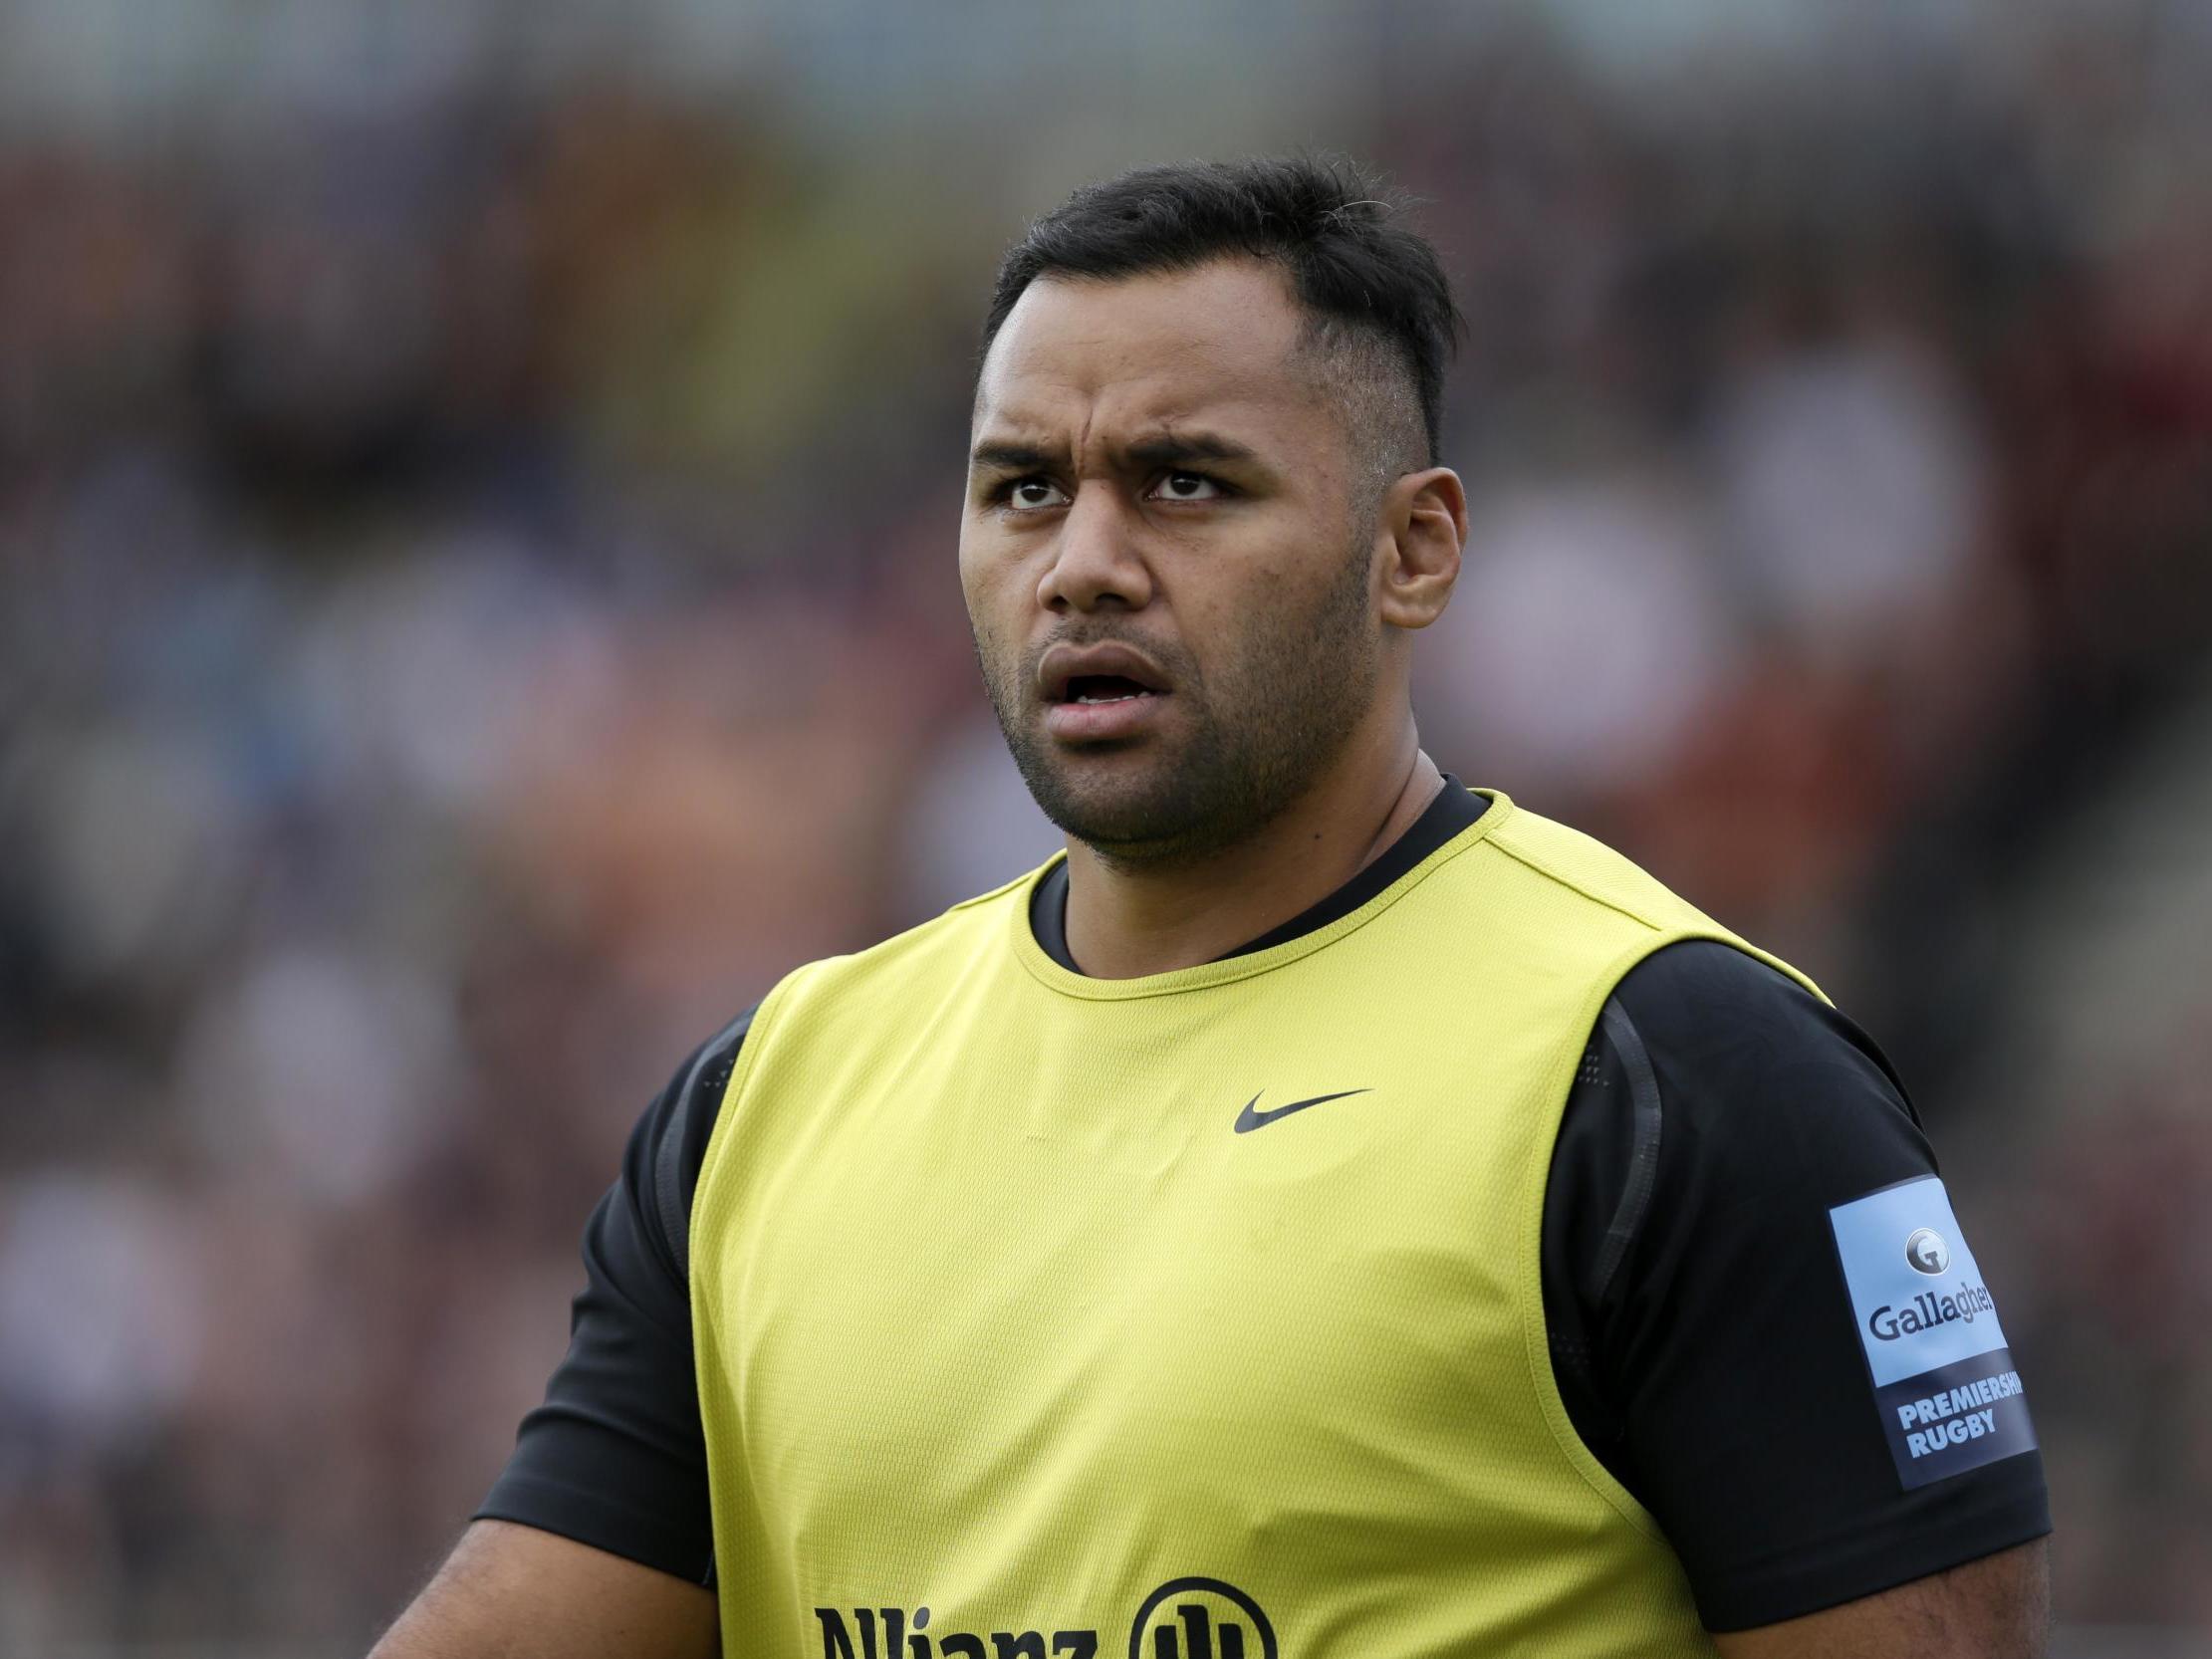 Vunipola's first appearance since re-fracturing his arm against South Africa in June totalled 36 minutes